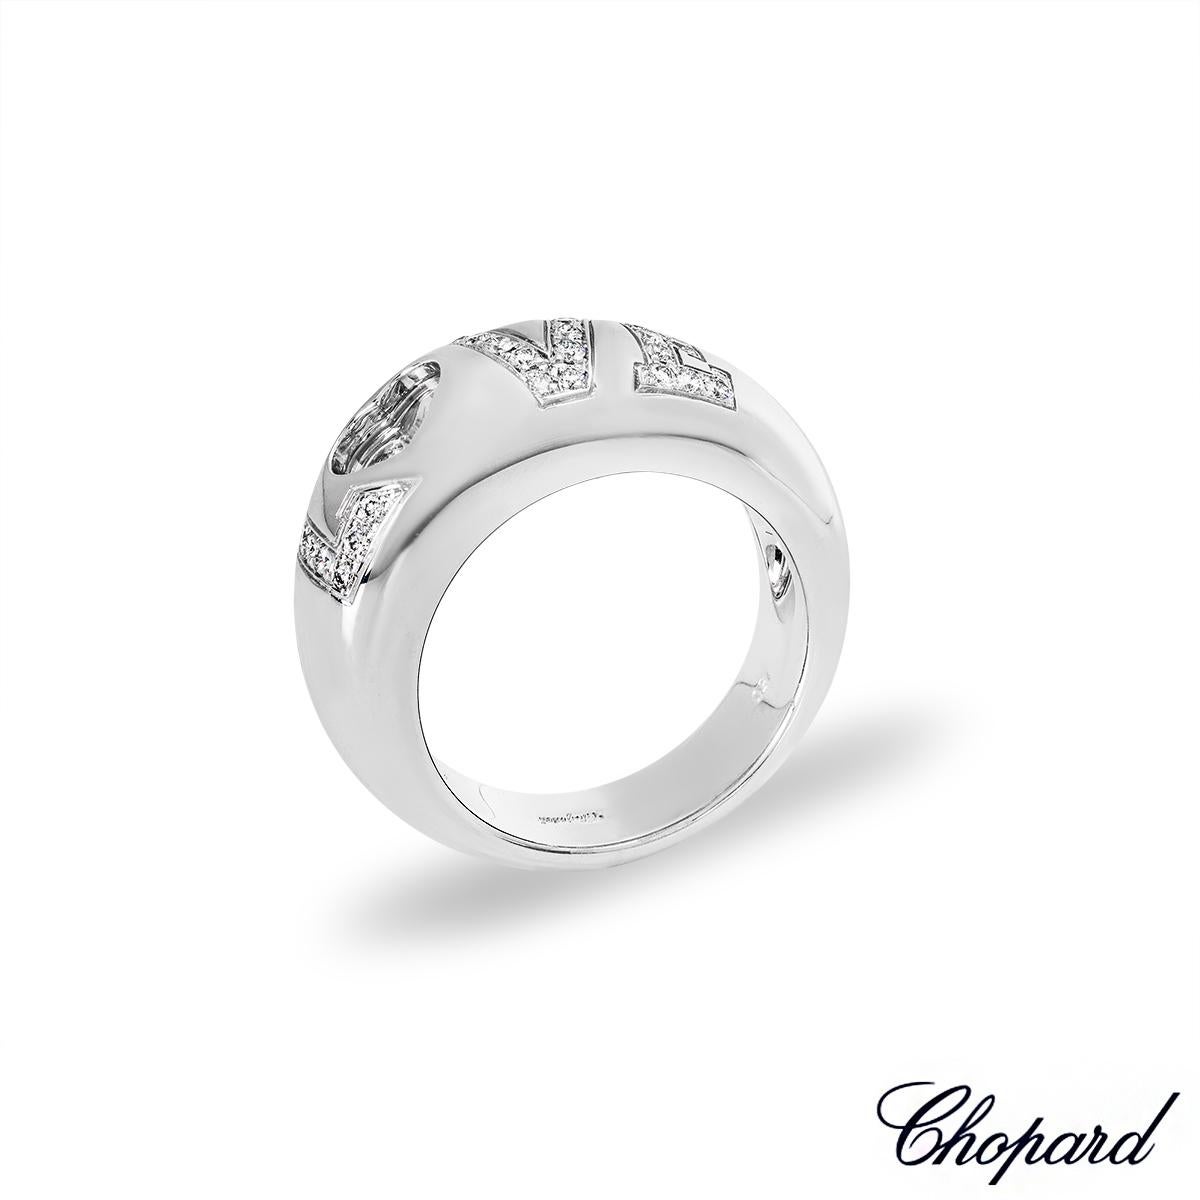 A lovely 18k white gold diamond ring by Chopard from the Happy Diamonds collection. The ring features the word 'Love' pave set with 28 round brilliant cut diamonds with an approximate total weight of 0.30ct, F-G colour and VS clarity. The 'O' is in